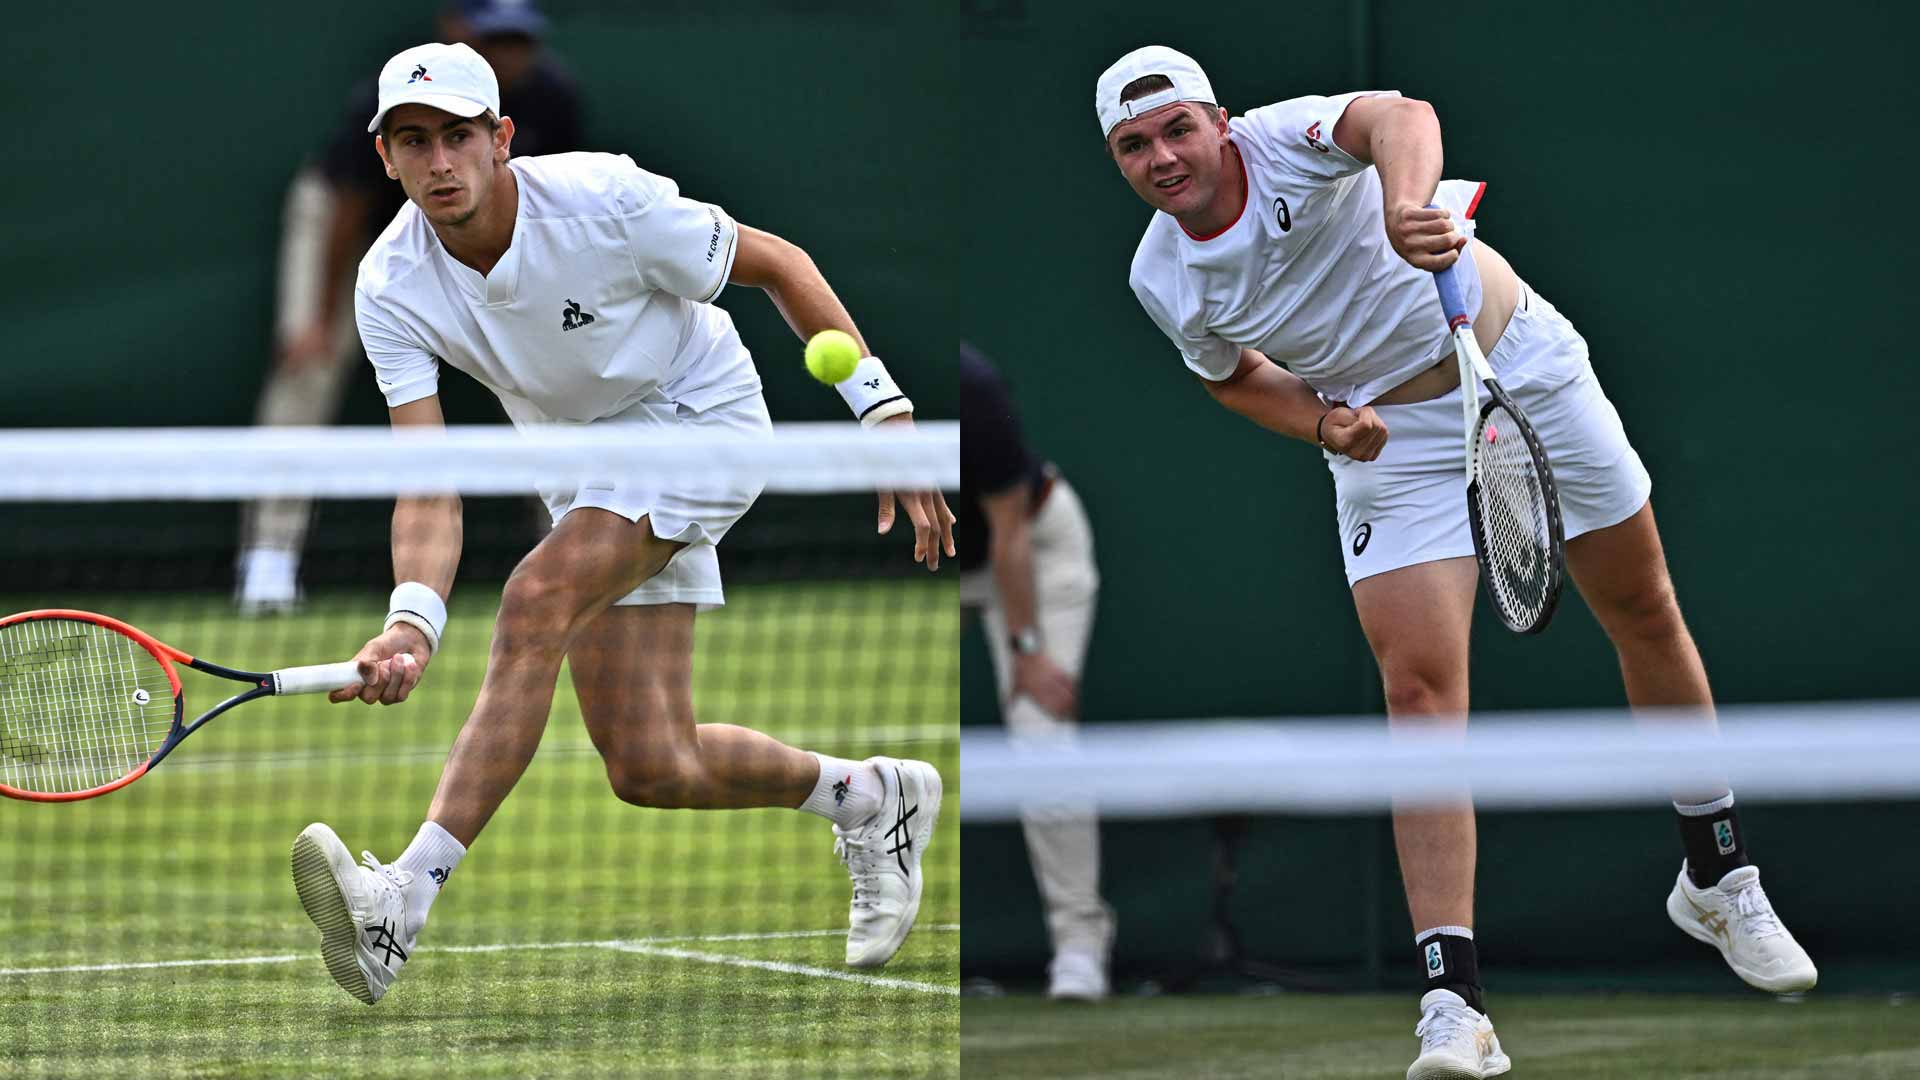 Matteo Arnaldi (left) and Dominic Stricker are playing Wimbledon for the first time.